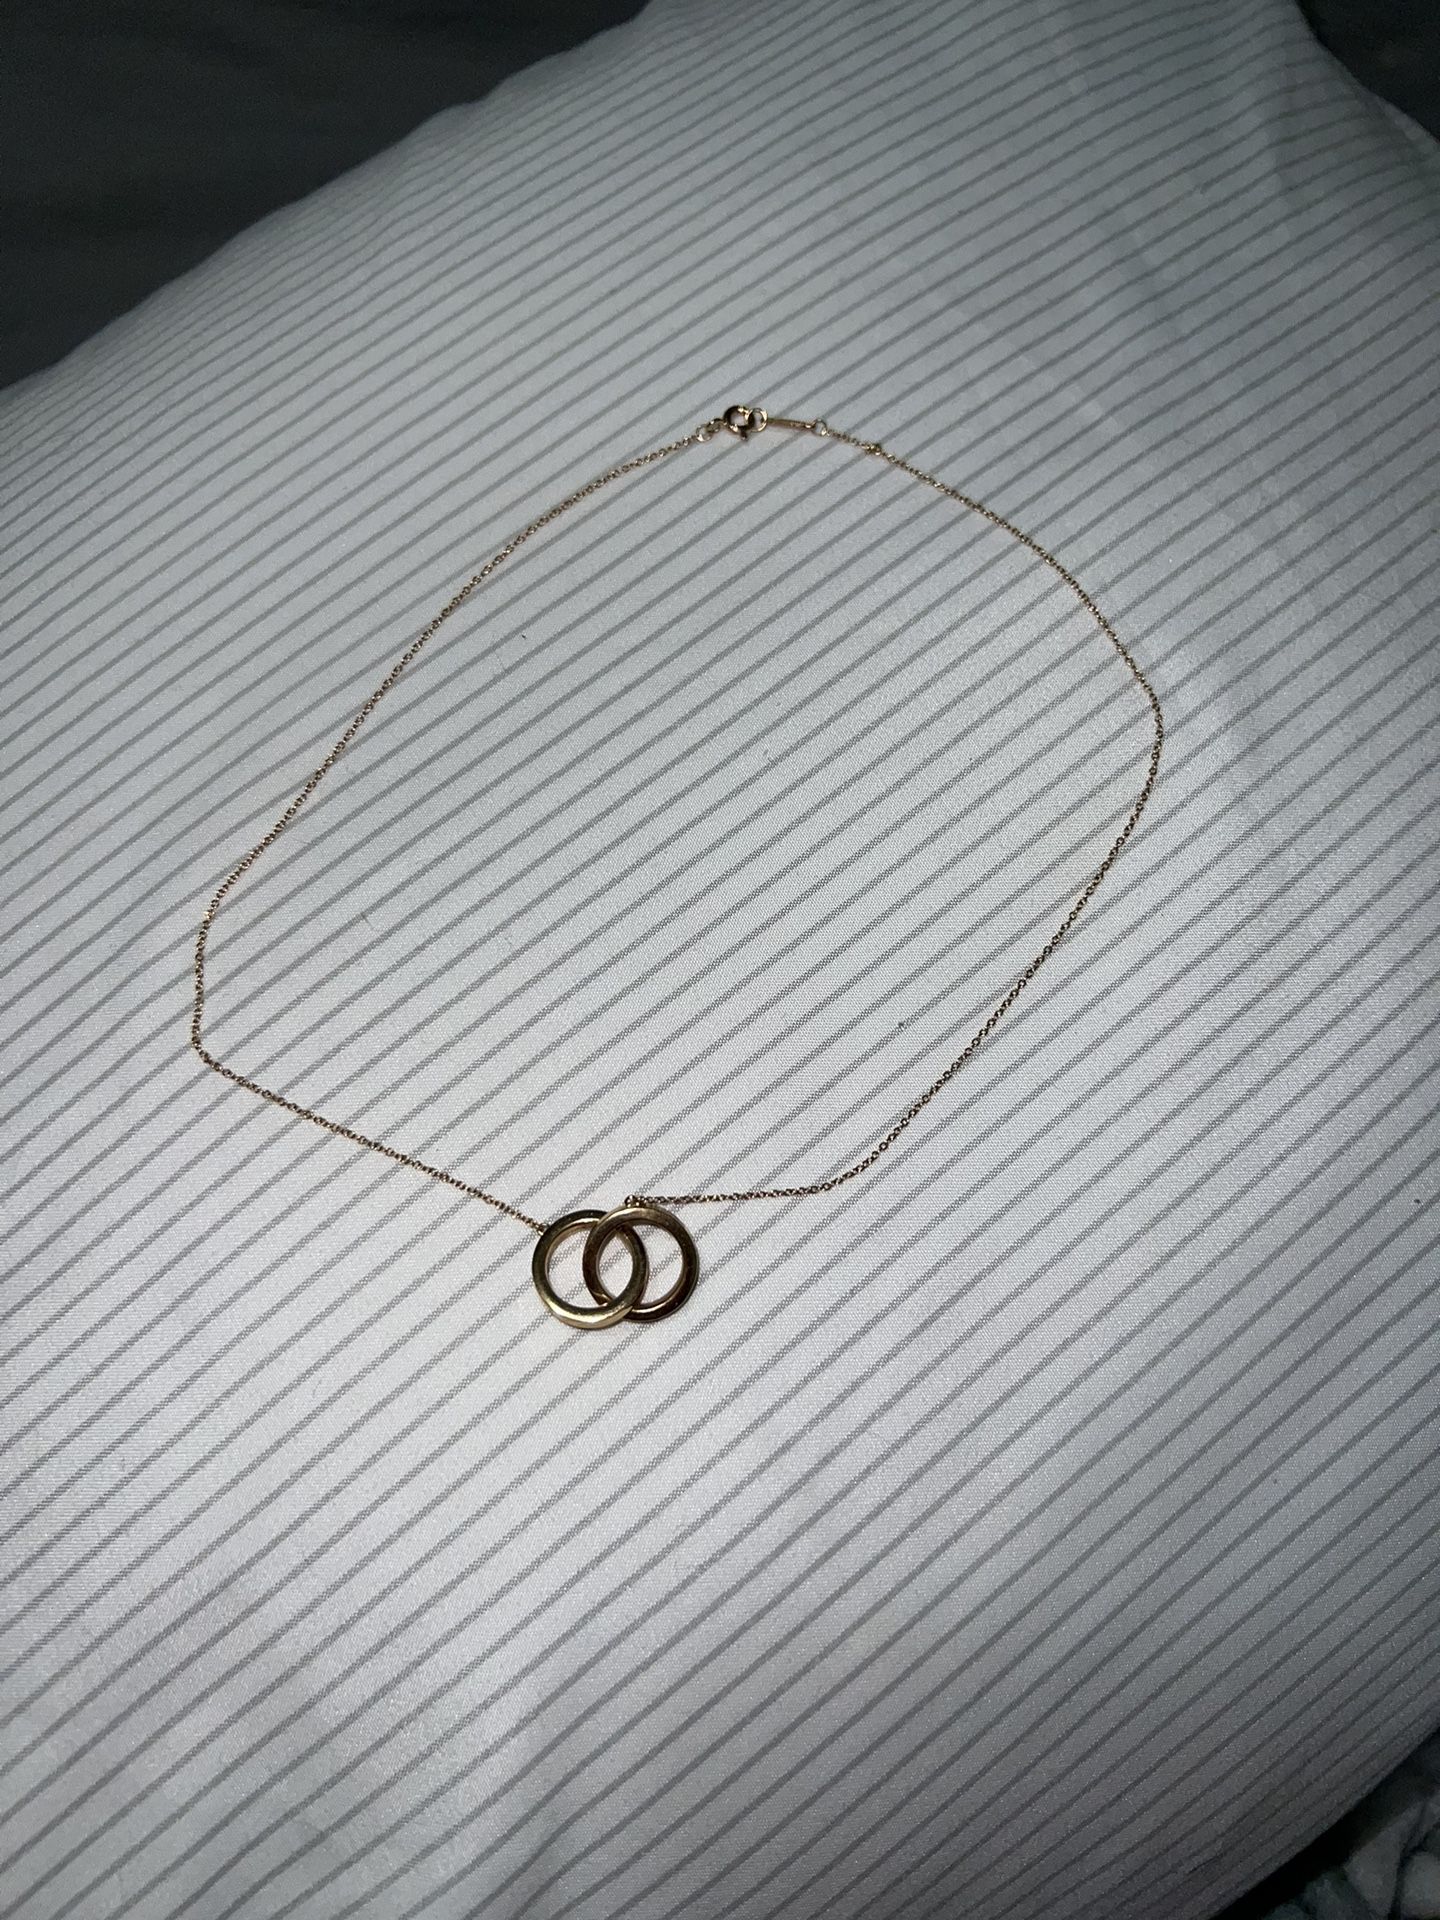 Tiffany & Co Gold Necklace